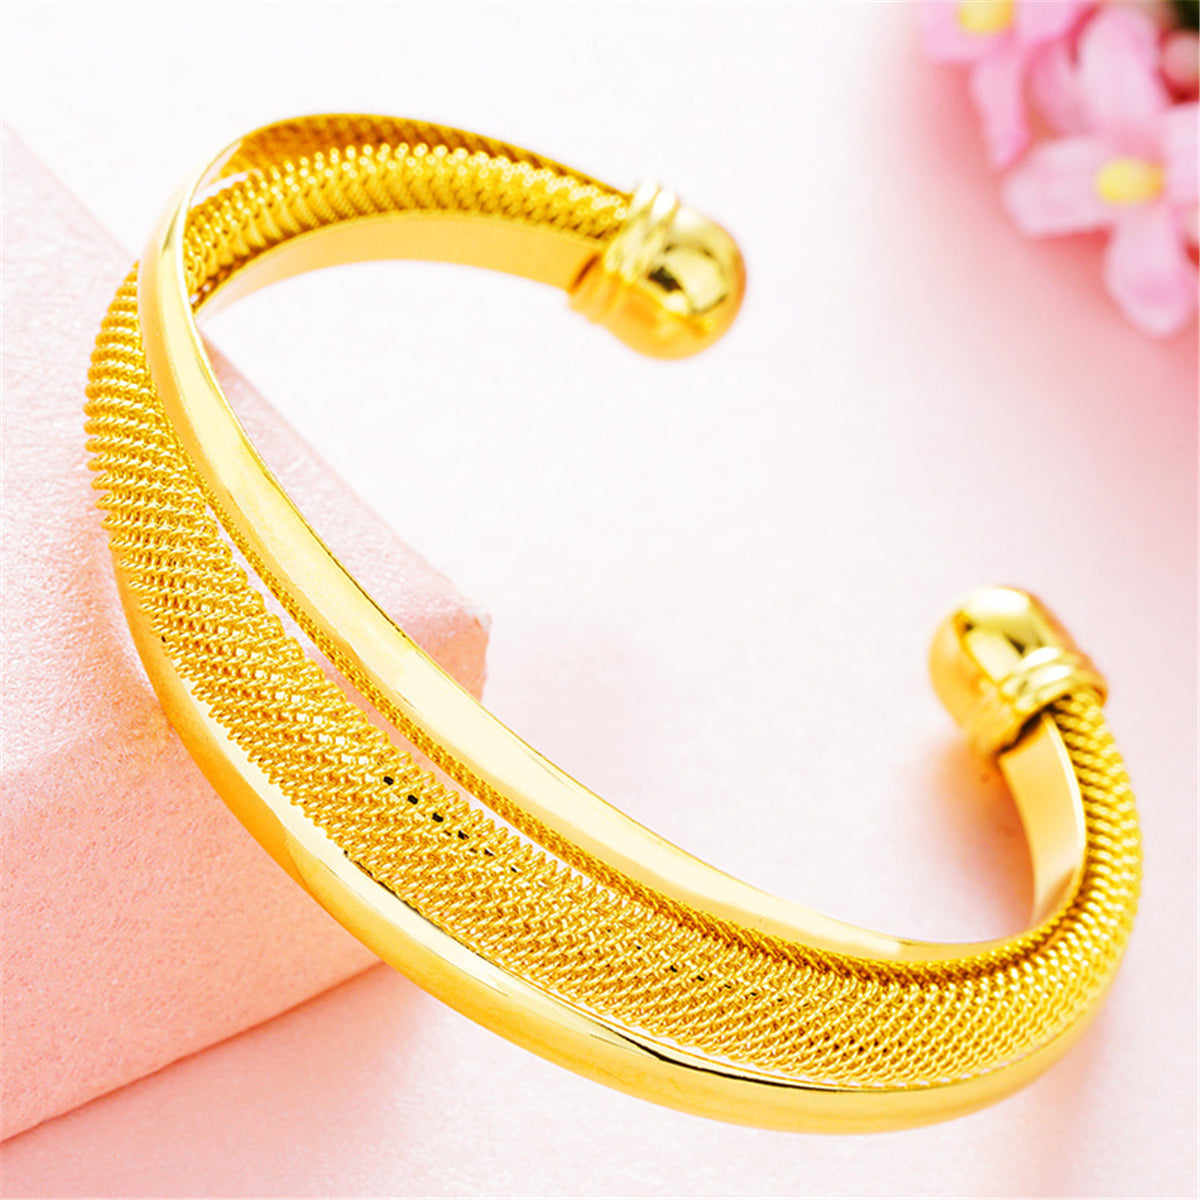 18K Gold-Plated Web Capped Cuff